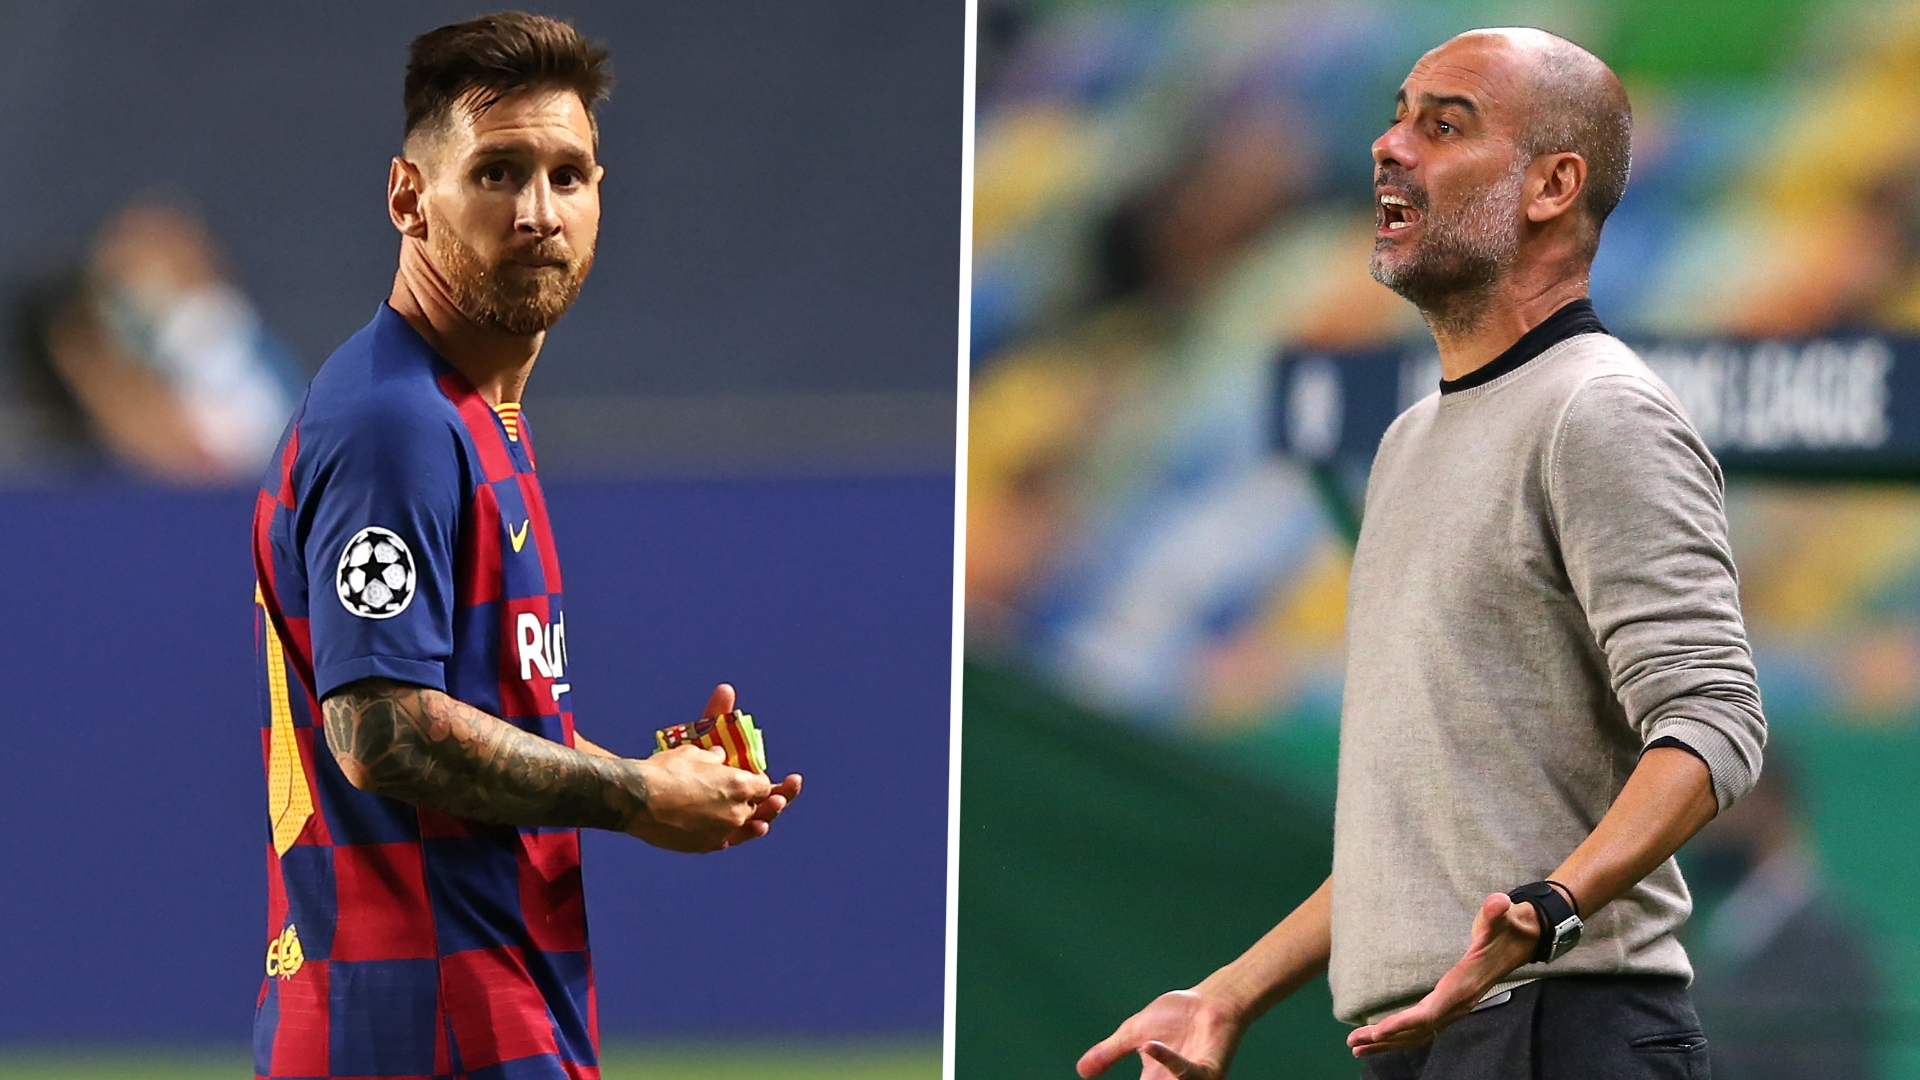 'Liverpool won't go near Messi' – Carragher tips Barcelona star for Man City move